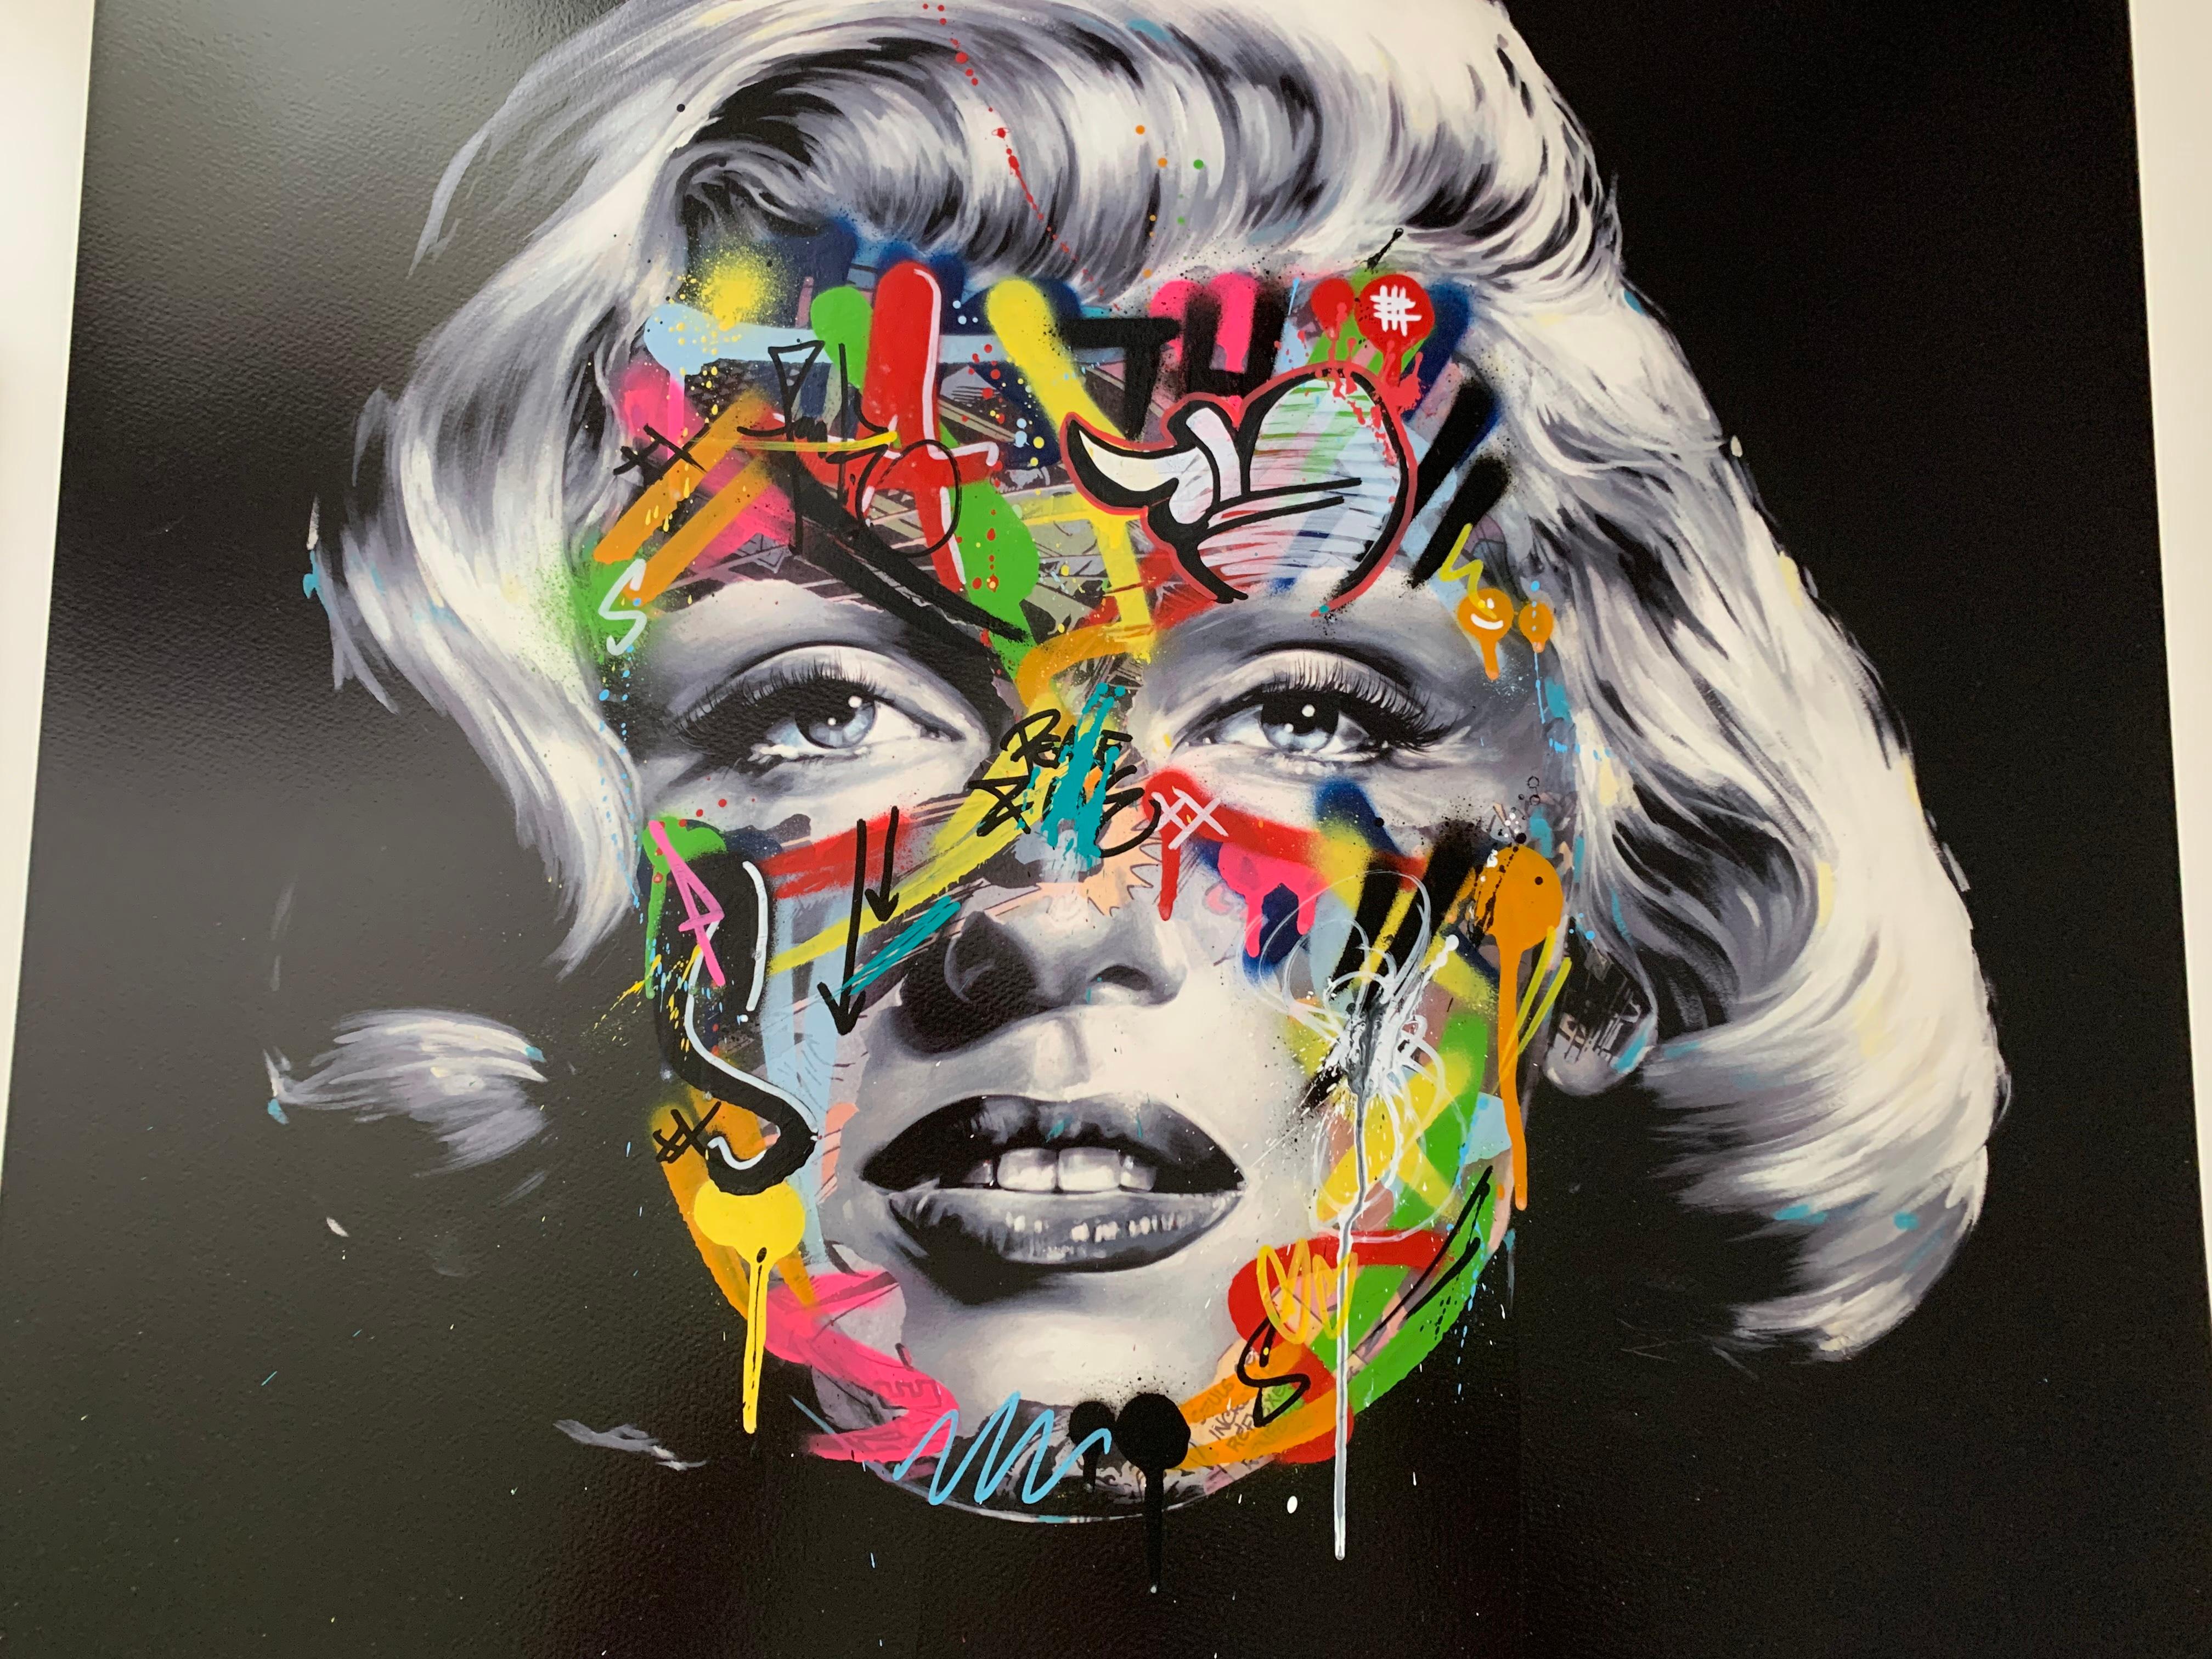 Marilyn Monroe Street Art Prints embellished with Paint Spray by Martin Whatson